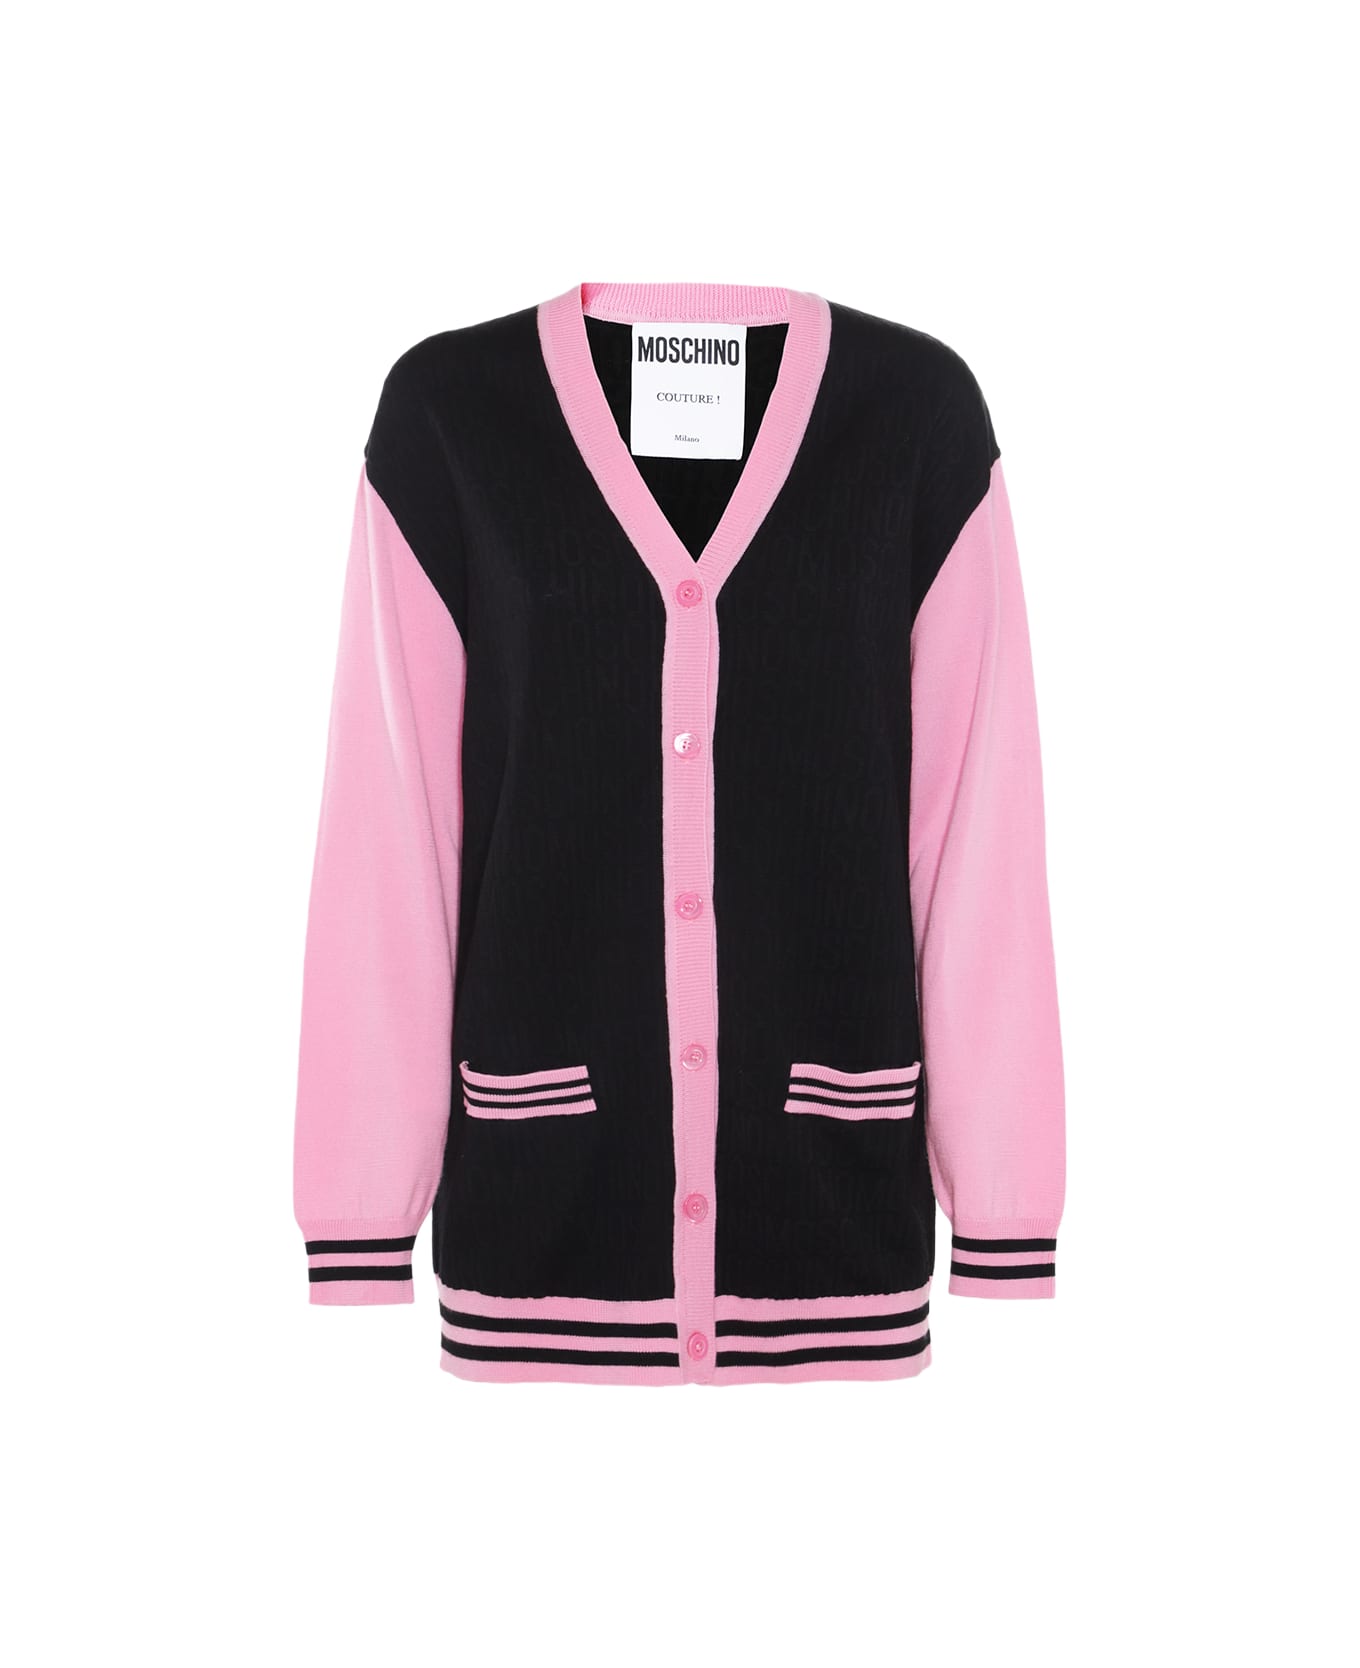 Moschino Black And Pink Wool Knitwear - Black